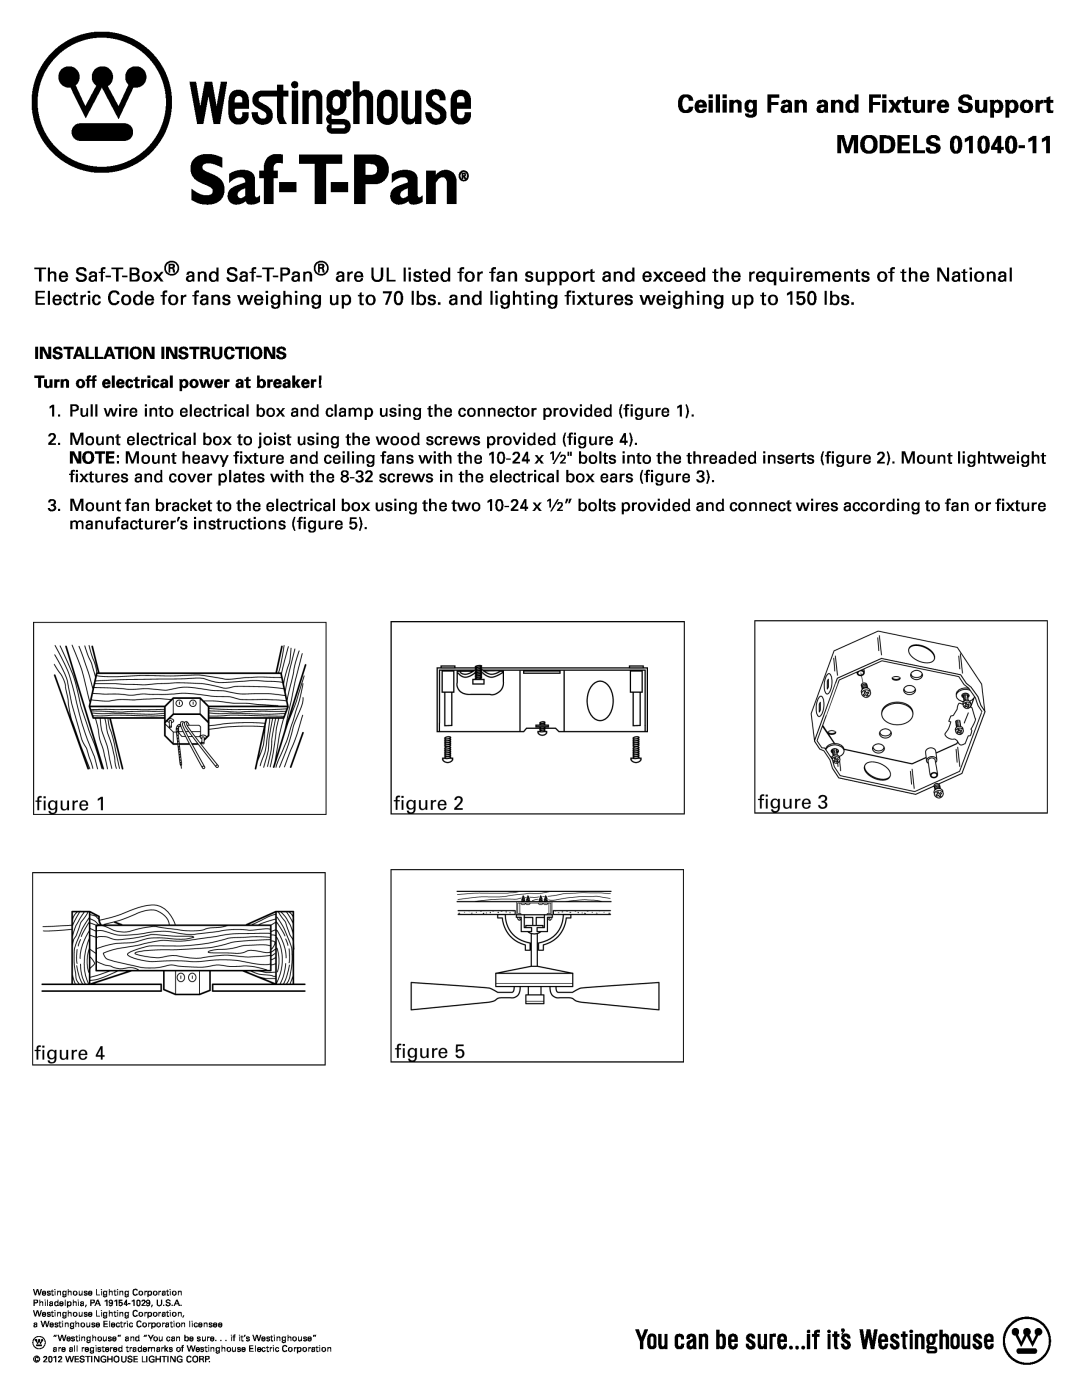 Westinghouse 01040-11 installation instructions Ceiling Fan and Fixture Support MODELS, Installation Instructions 